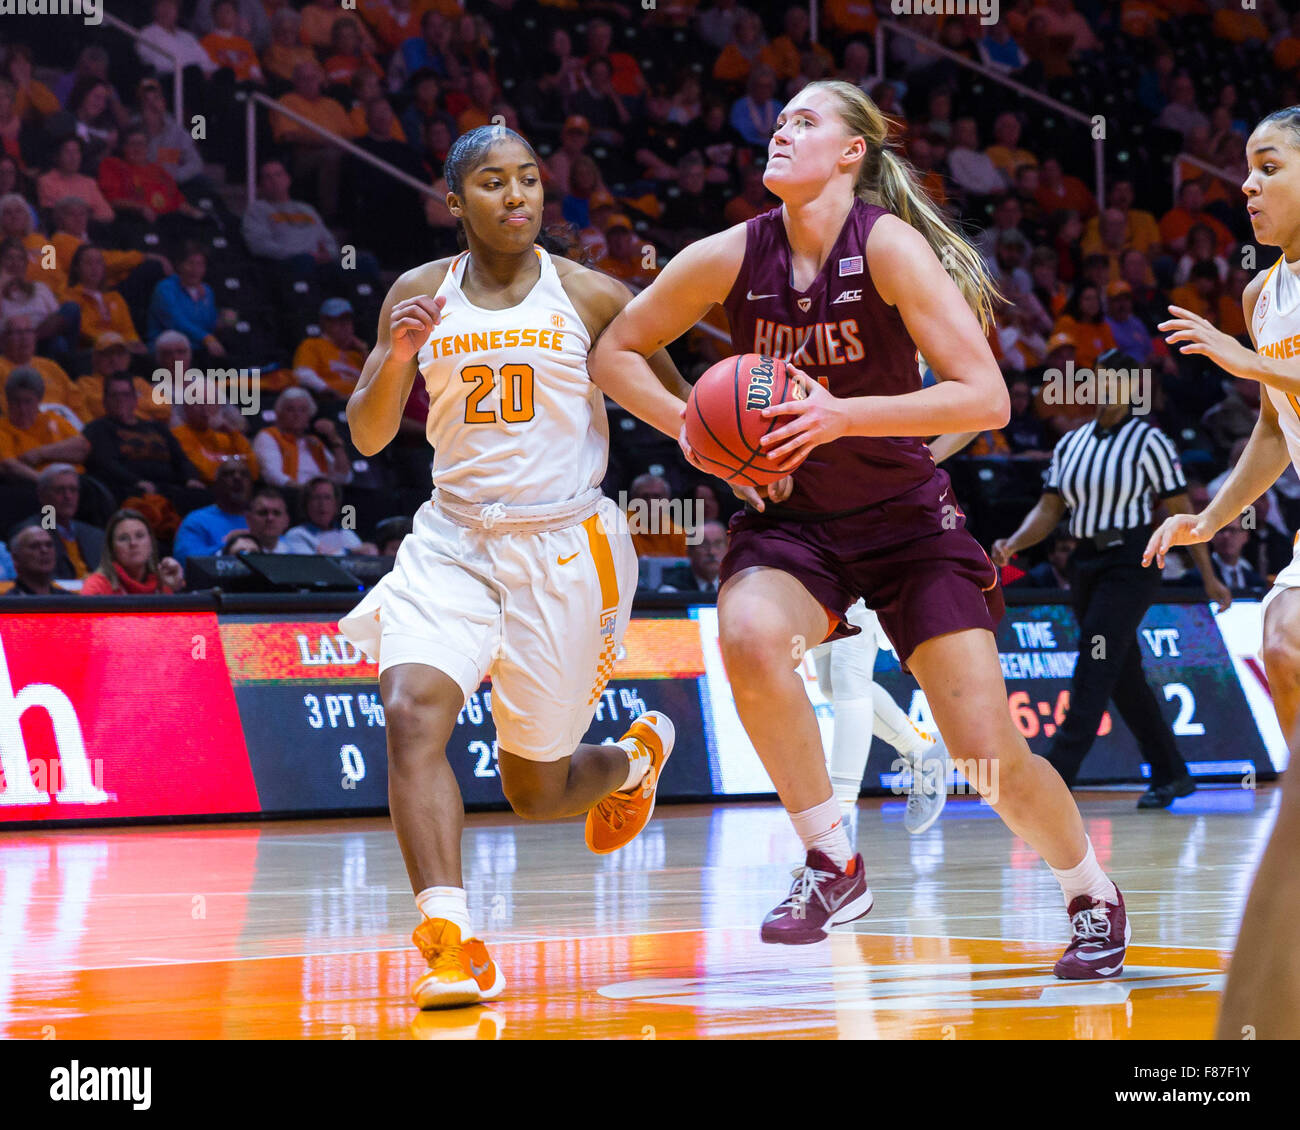 December 6, 2015: Regan Magarity #11 of the Virginia Tech Hokies drives to the basket against Te'a Cooper #20 of the Tennessee Lady Volunteers during the NCAA basketball game between the University of Tennessee Lady Volunteers and the Virginia Tech Hokies at Thompson Boling Arena in Knoxville TN Tim Gangloff/CSM Stock Photo